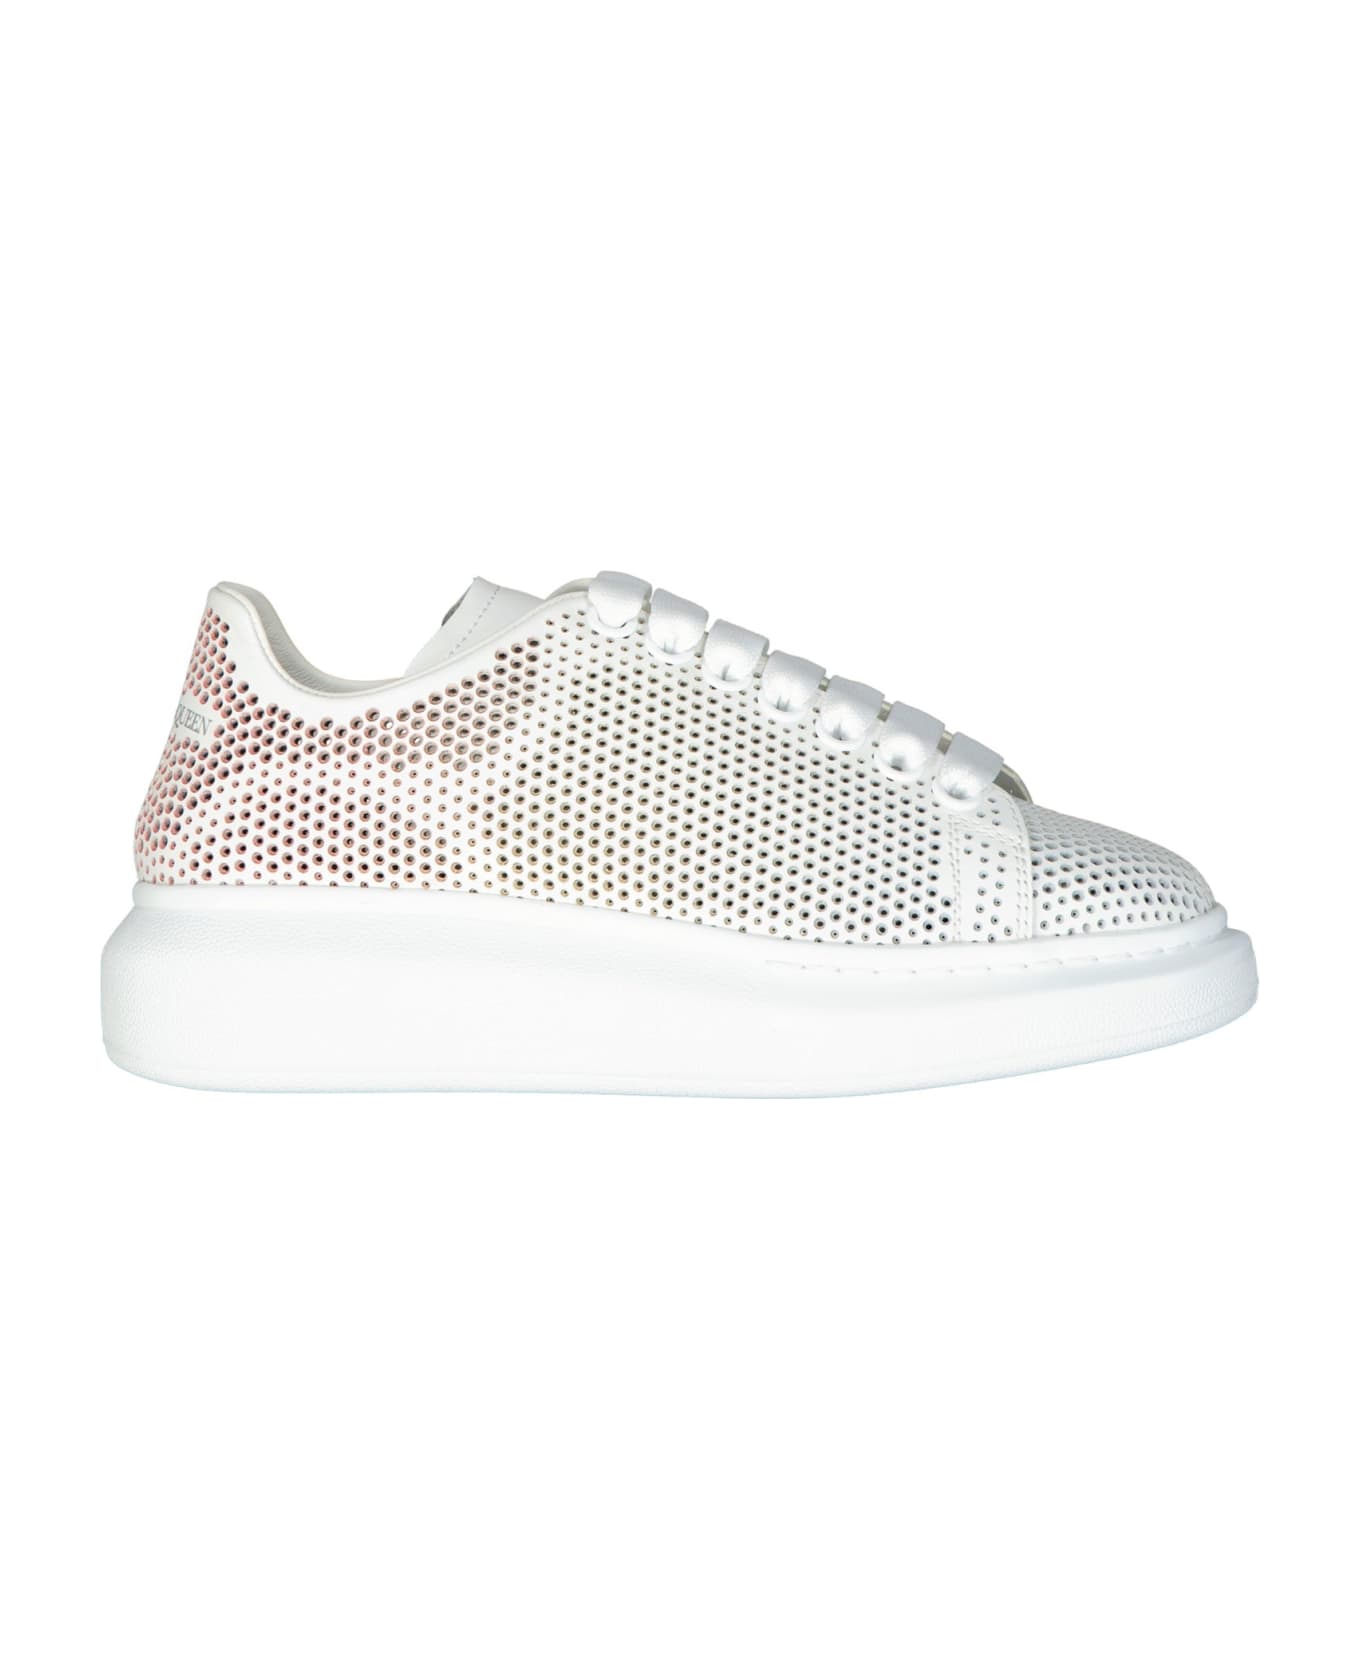 Alexander McQueen Oversized Dotted Cut-out Sneakers - White